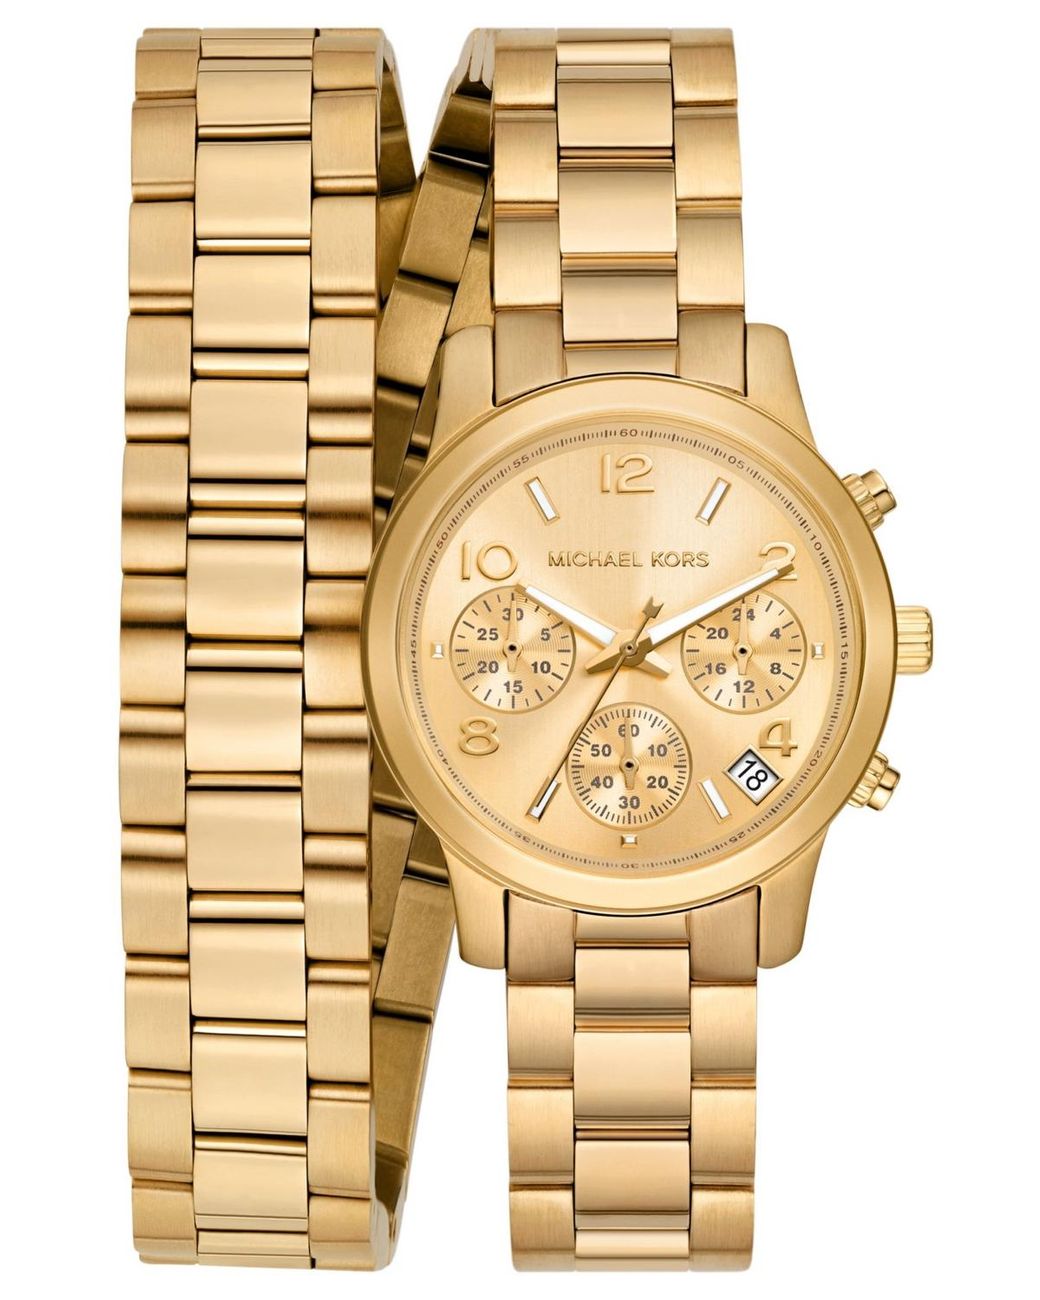 Steel Lyst 34mm Stainless Kors Natural | Chronograph Double Wrap Bracelet Michael in Runway Watch